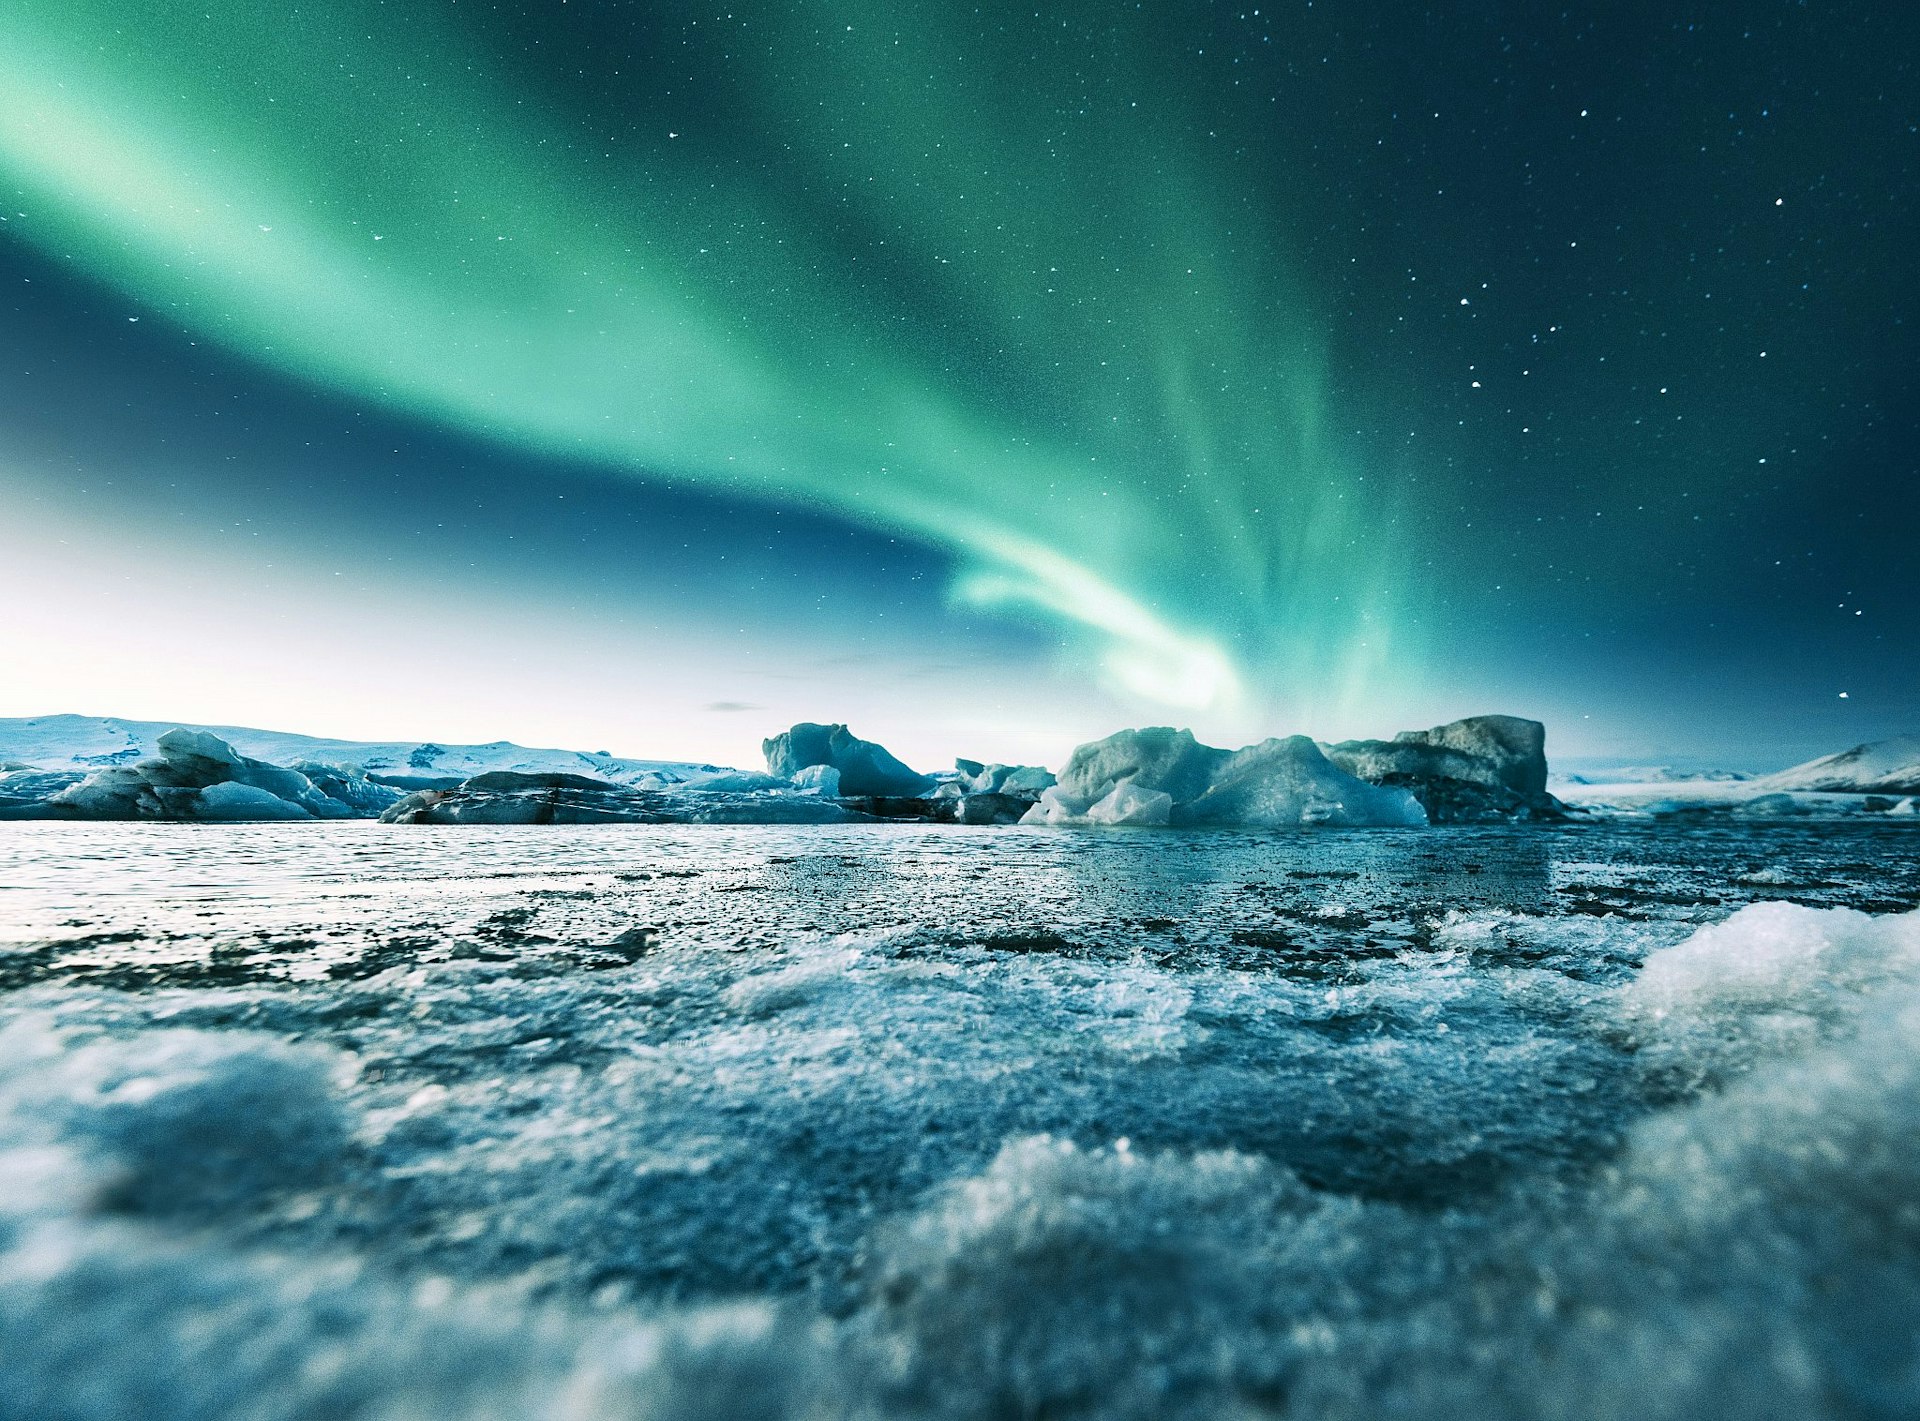 The shimmering green lights of the aurora borealis above a large icy glacial lake.